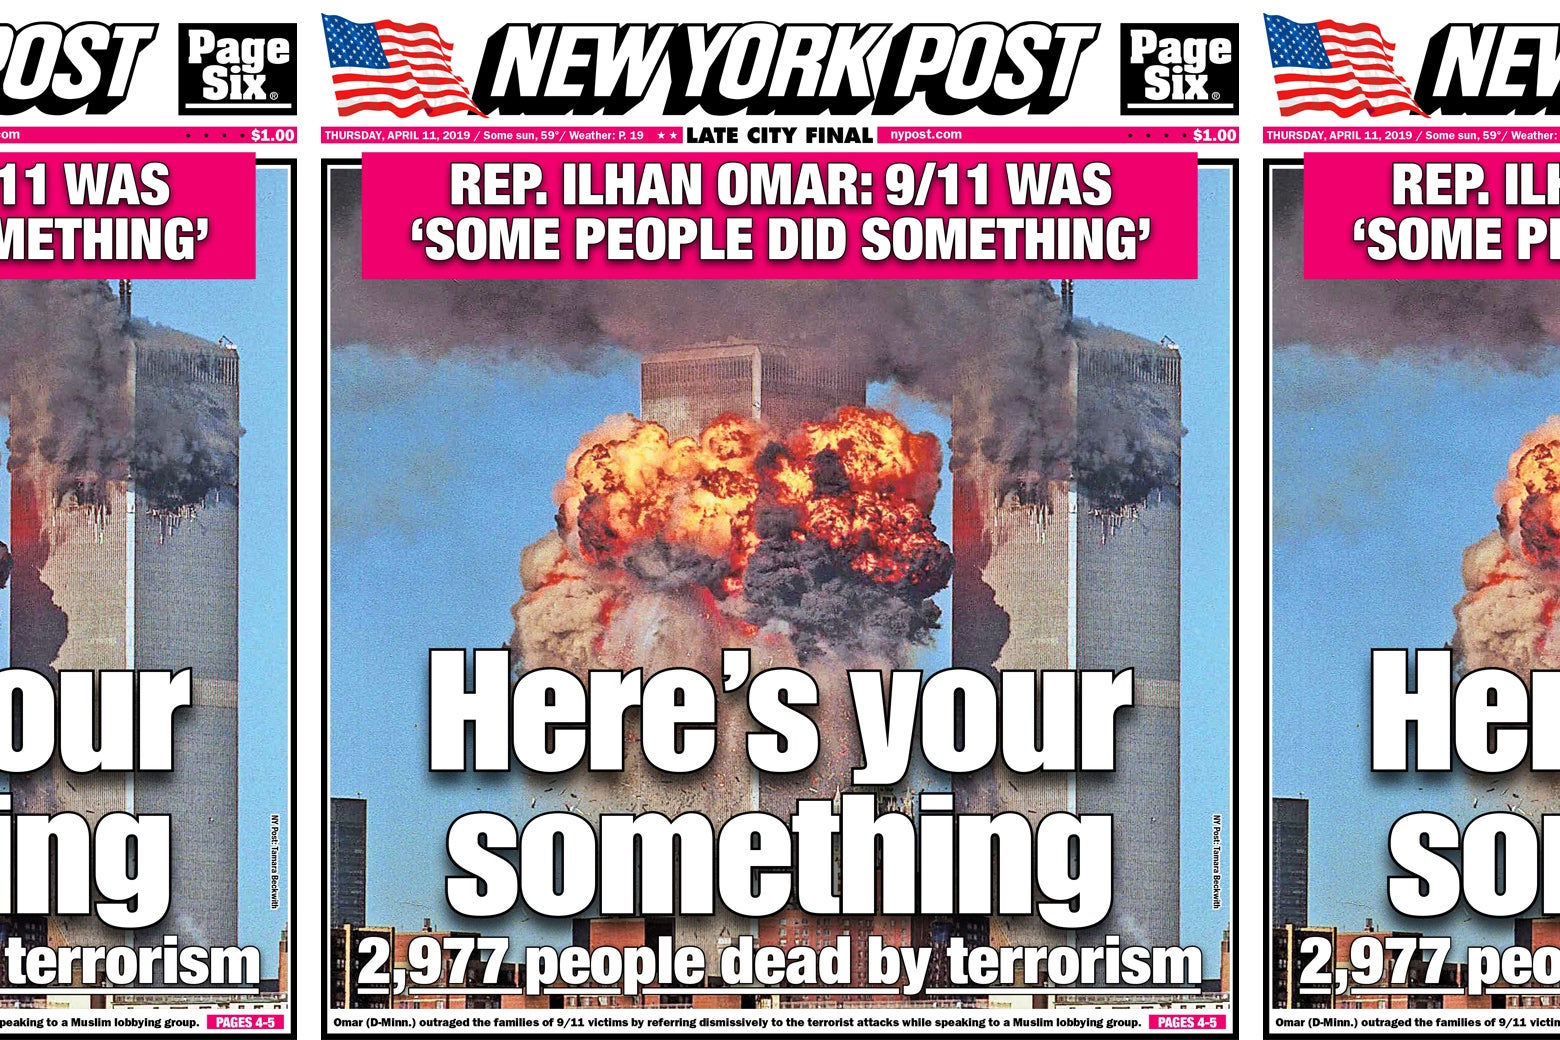 The April 11 cover of the New York Post.